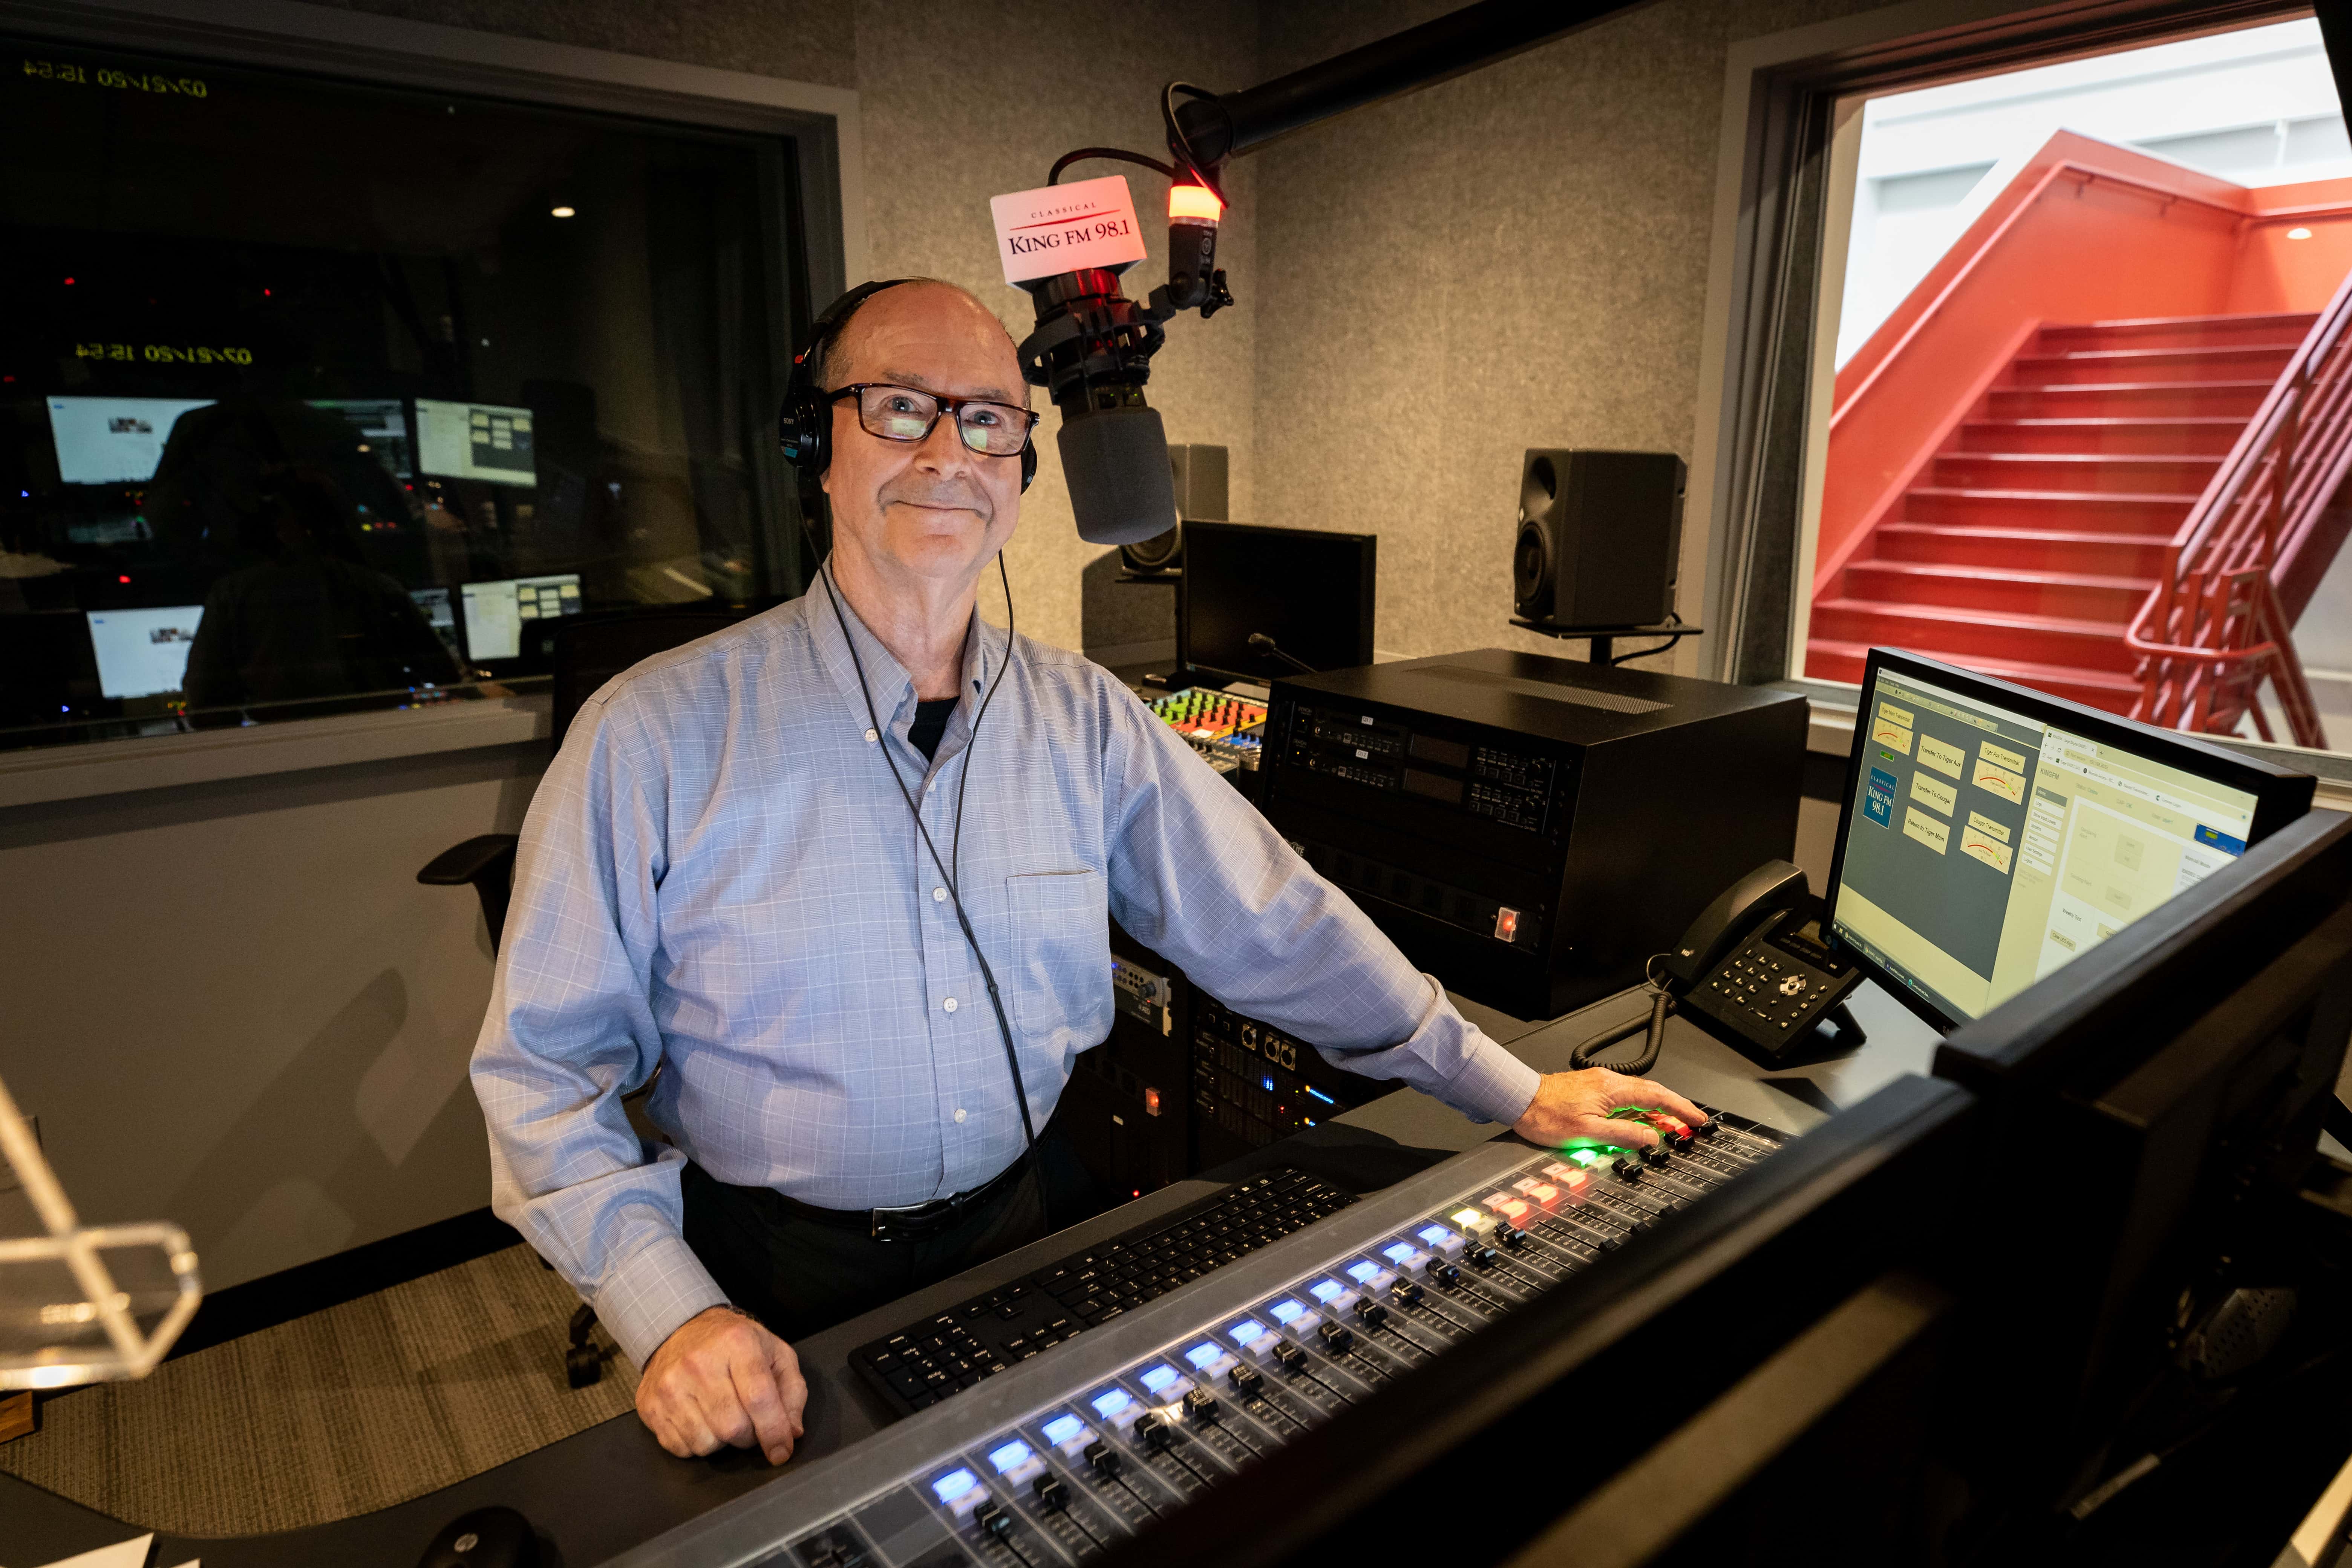 KING FM host Mike Brooks in front of the radio station's master control sound board, July 2020